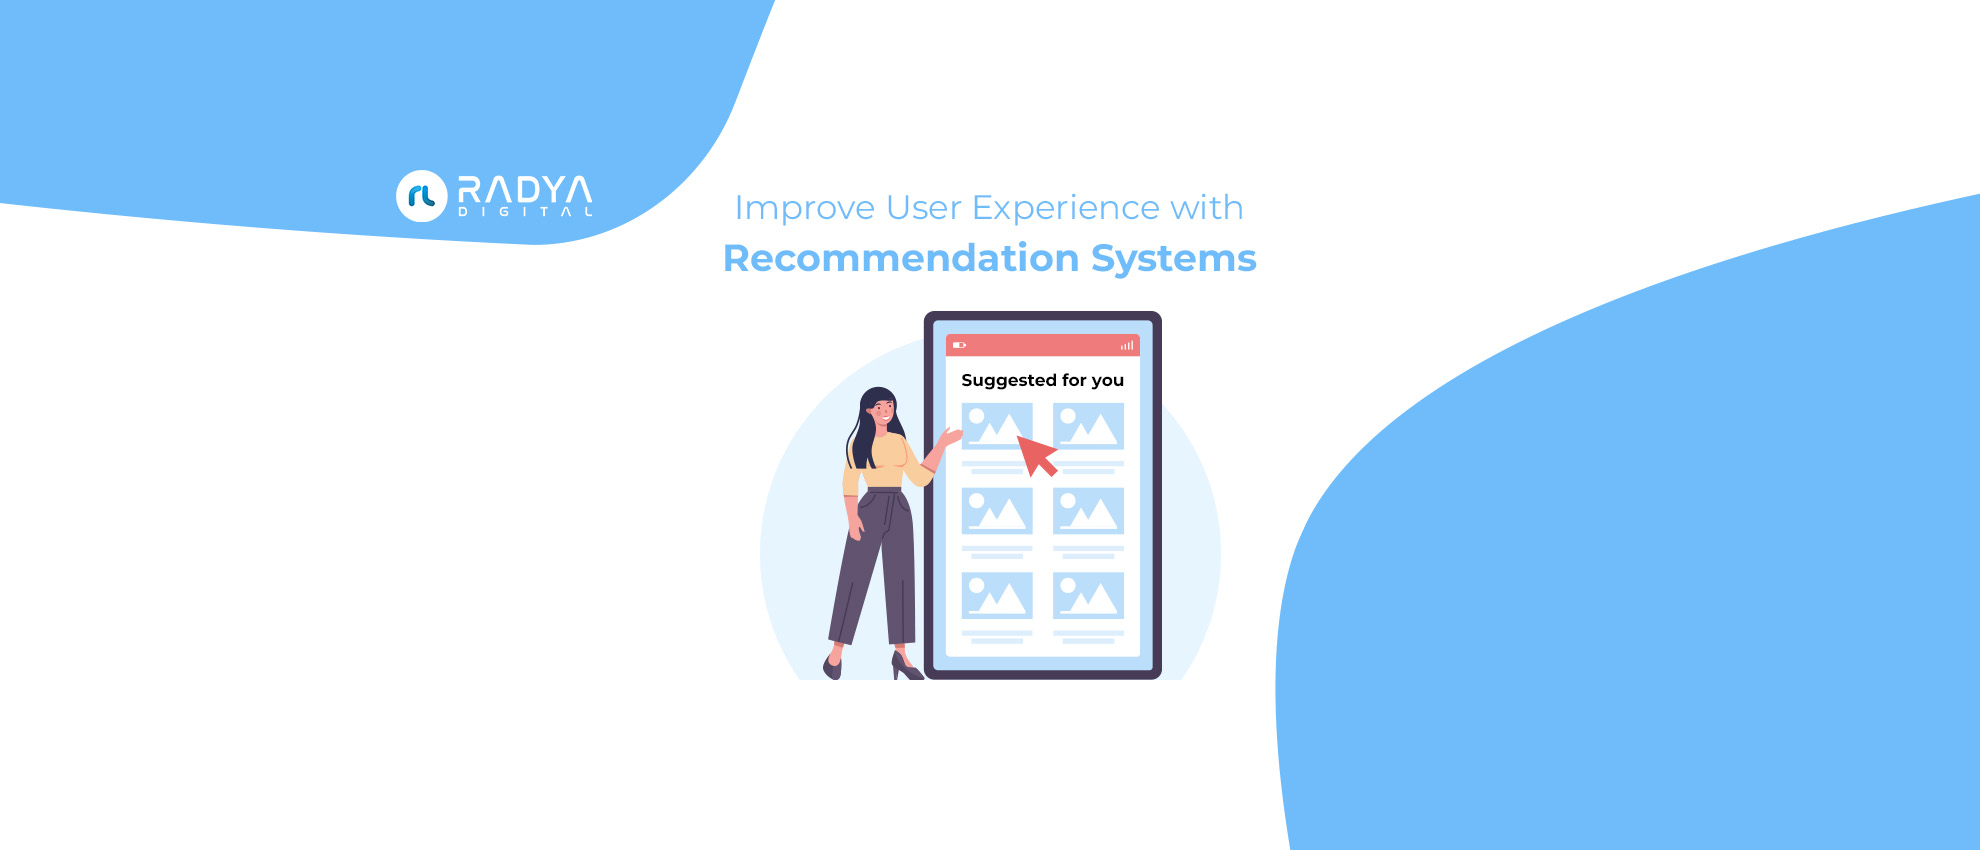 Image of Recommendation System: Improve user experience with relevant and personalized suggestions